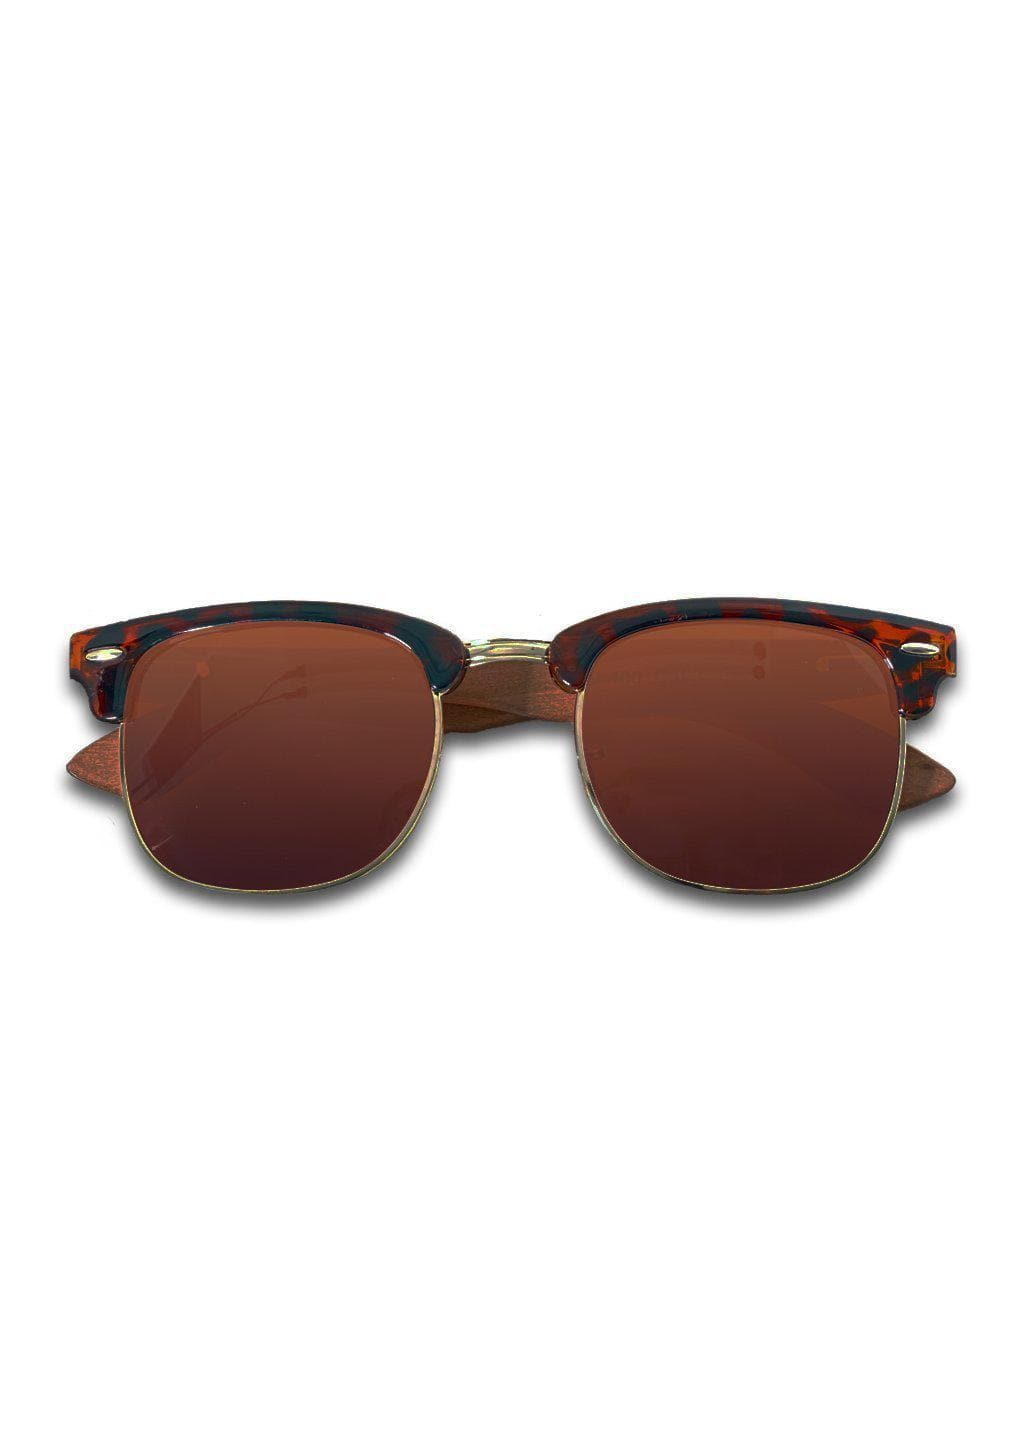 Eyewood Clubmaster - Cassidy - Our classic wooden sunglasses with style from the 1970s.